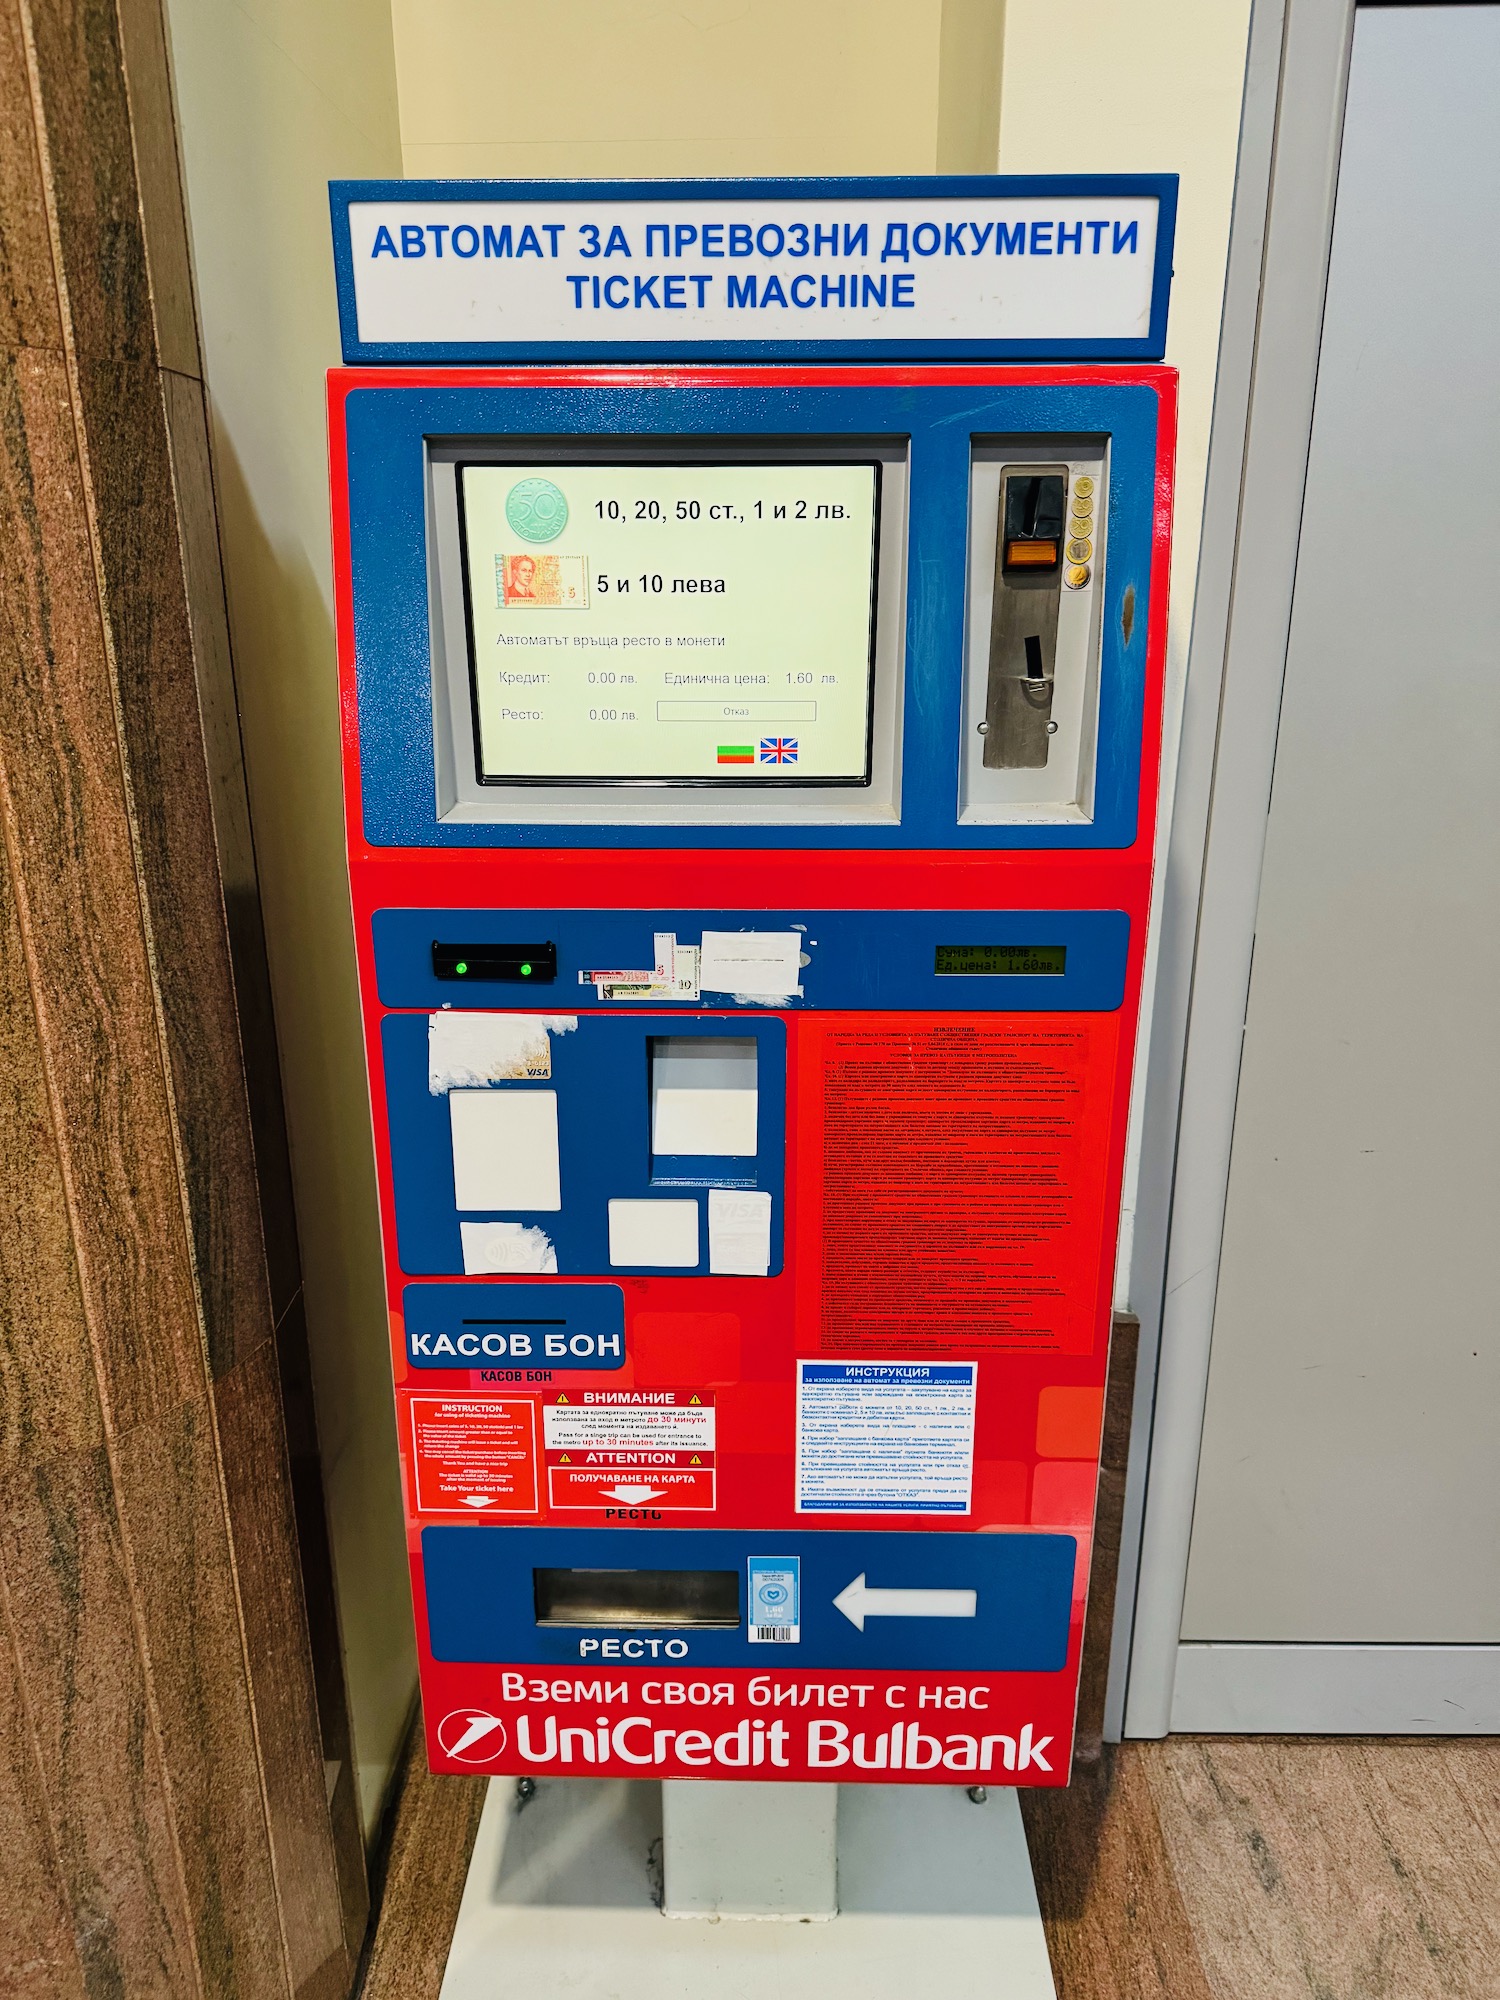 a machine with a screen and a sign